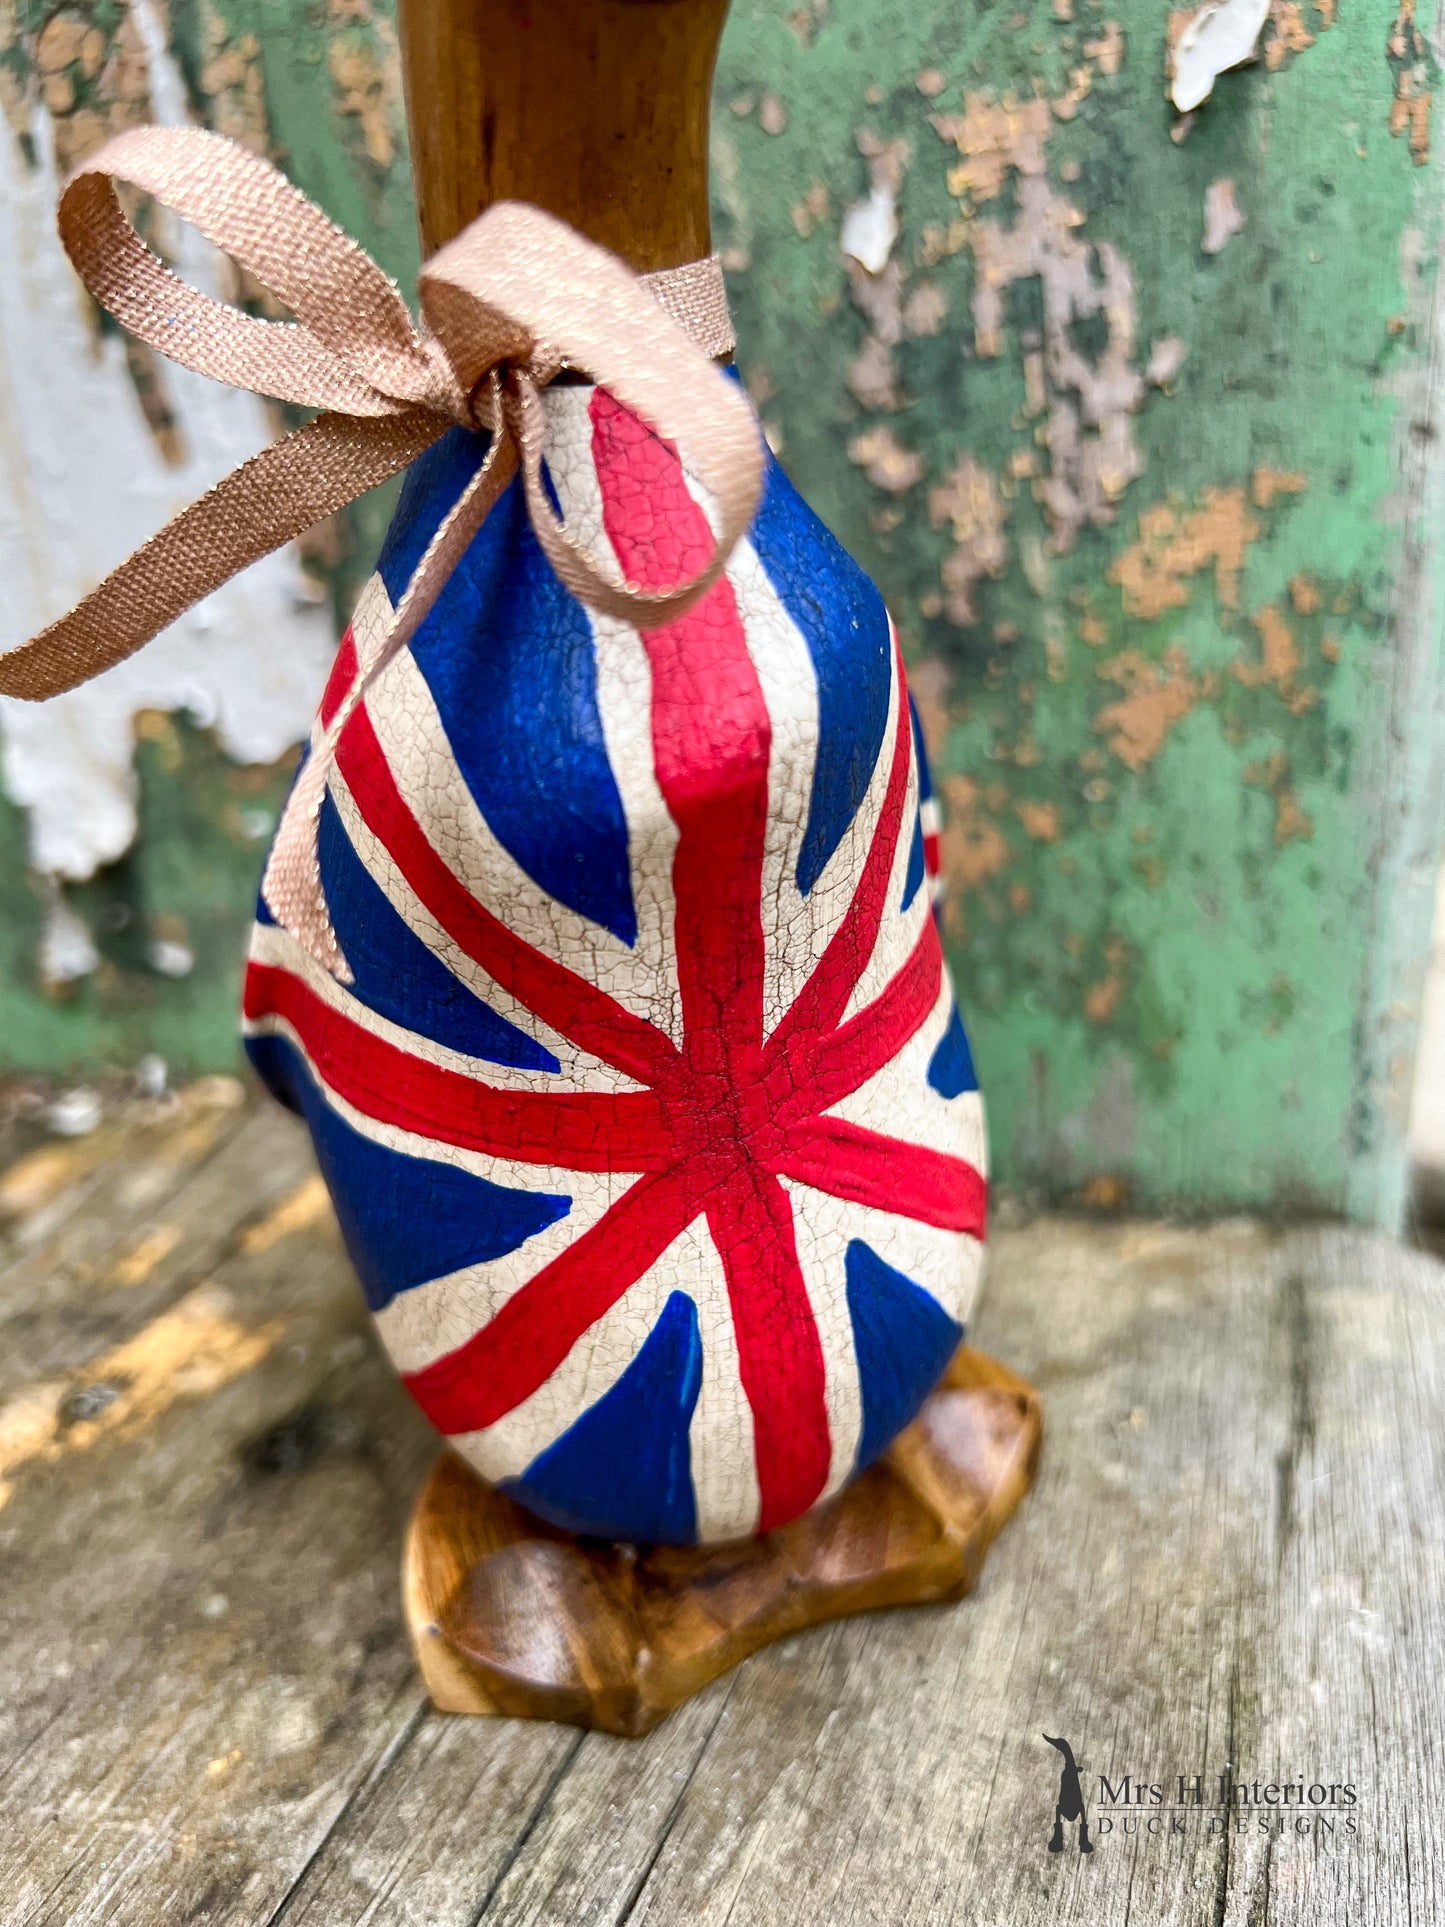 Crackle Jack Wooden Duck - The Union Jack UK Flag Duck - Coronation Decorated Wooden Duck in Boots by Mrs H the Duck Lady